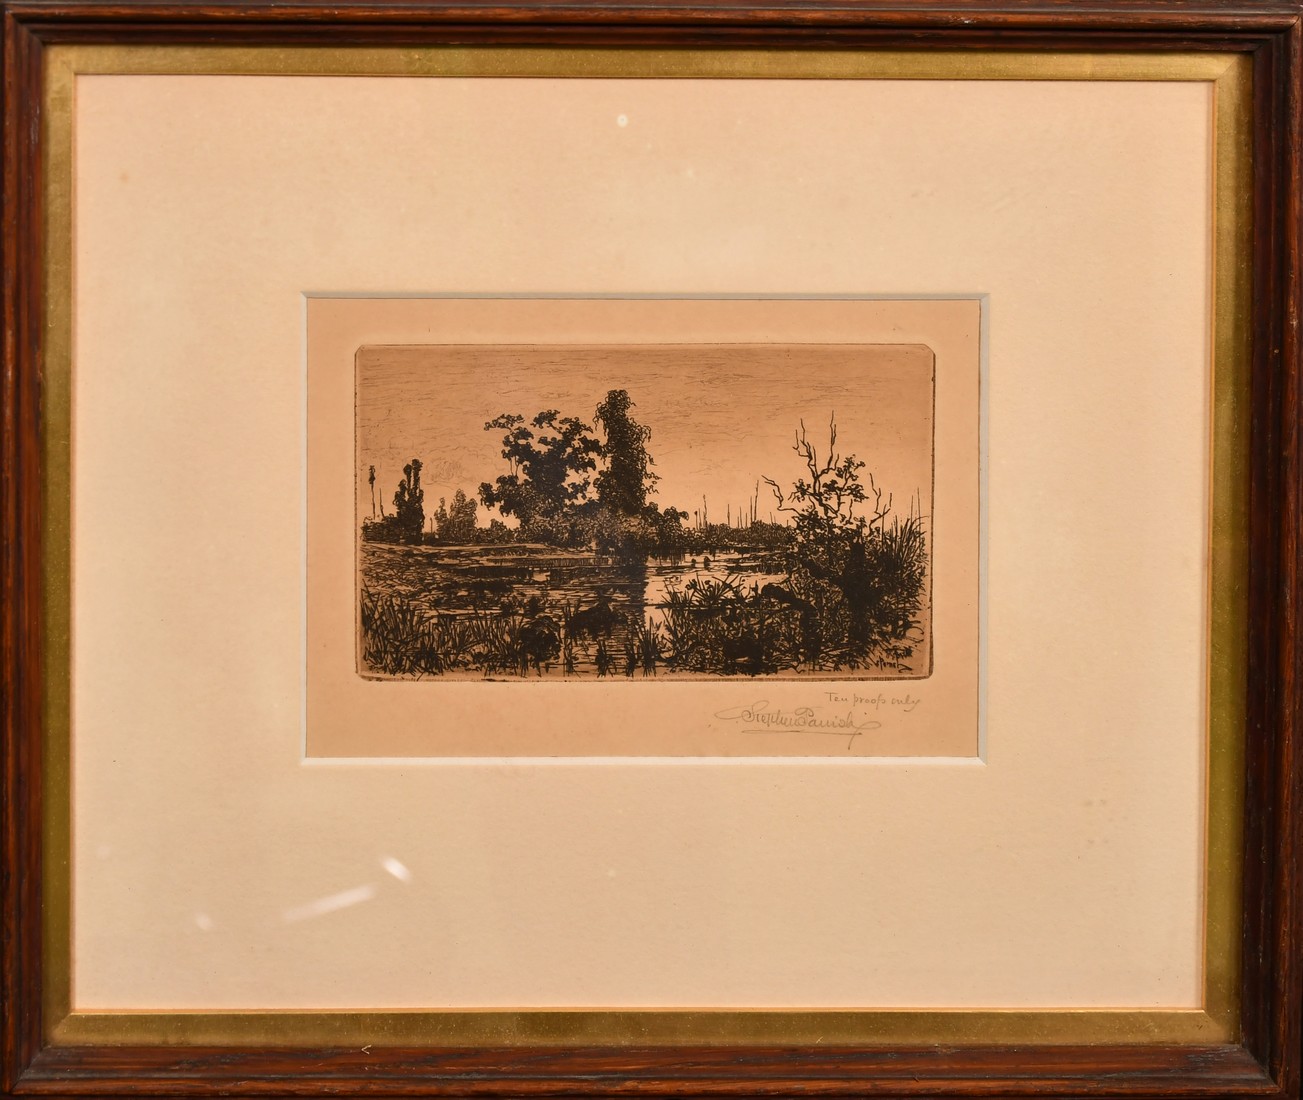 Stephen Parrish, a river landscape, etching, signed in pencil and inscribed 'Ten Proofs Only', - Image 2 of 4